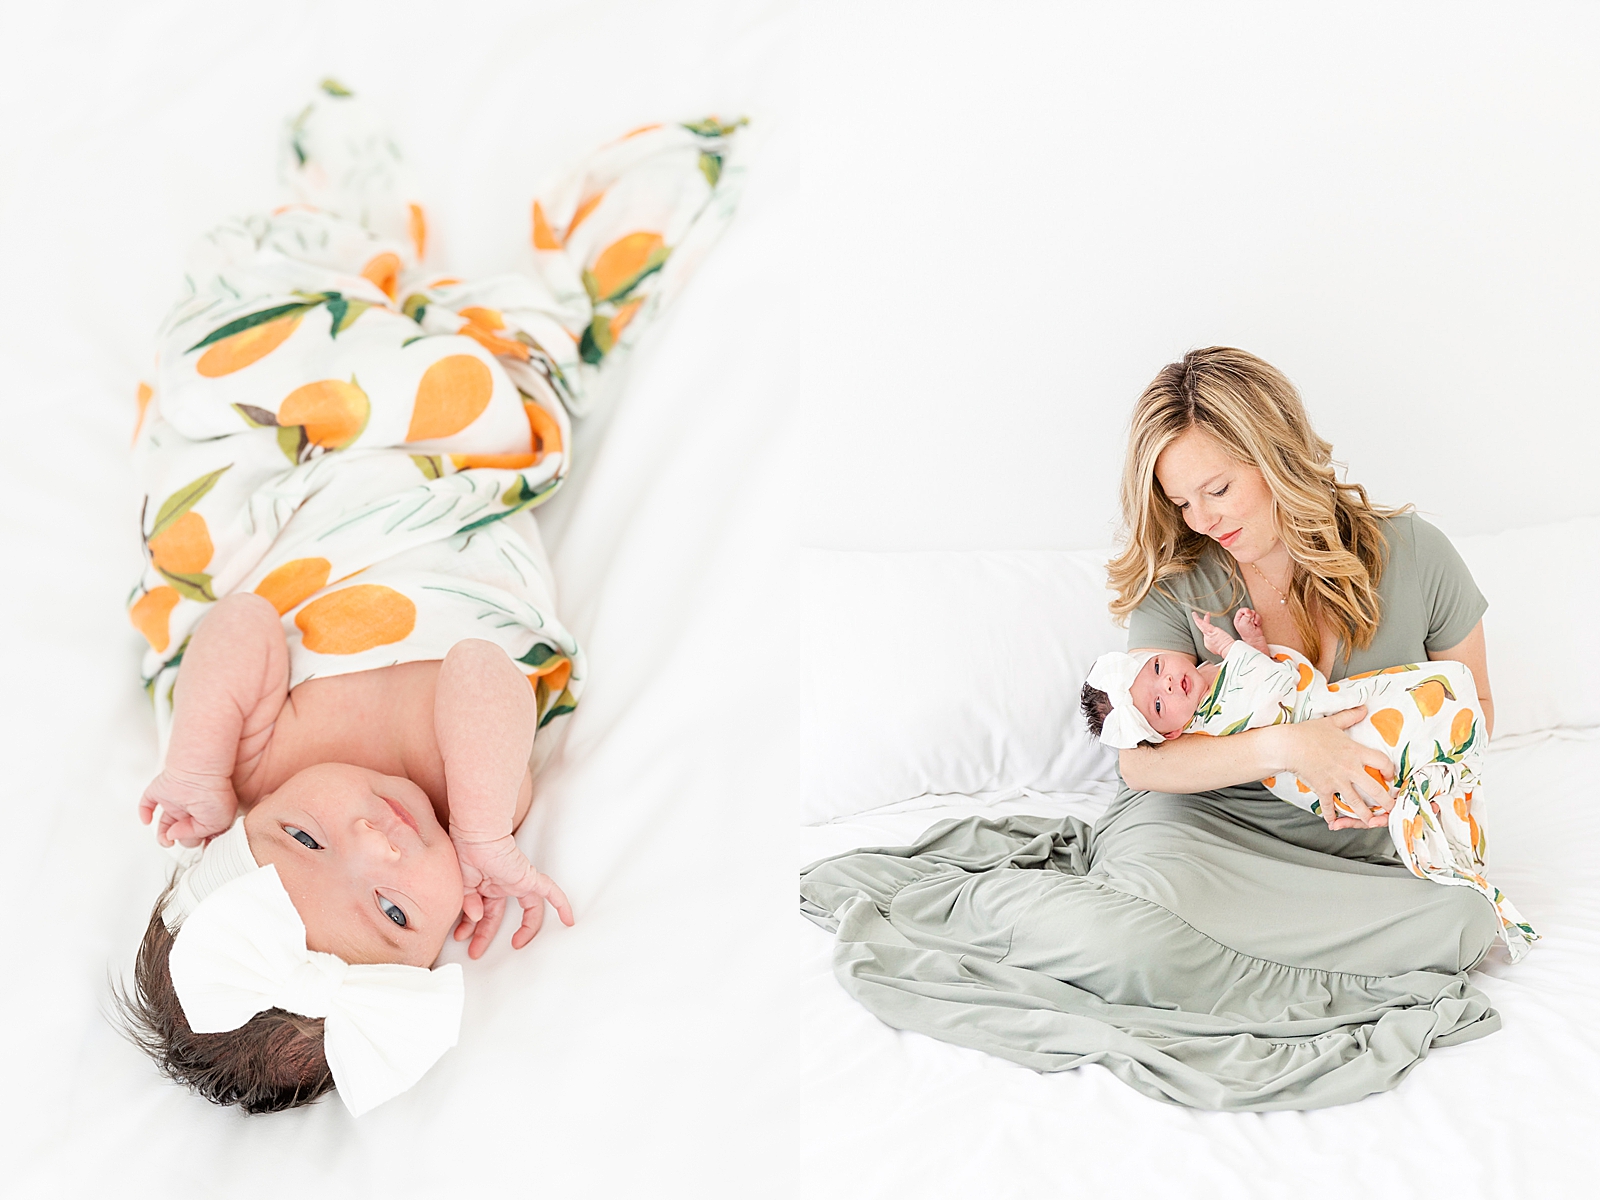 Baby in clementine swaddle on white bed and mom holding swaddled baby in sage green dress